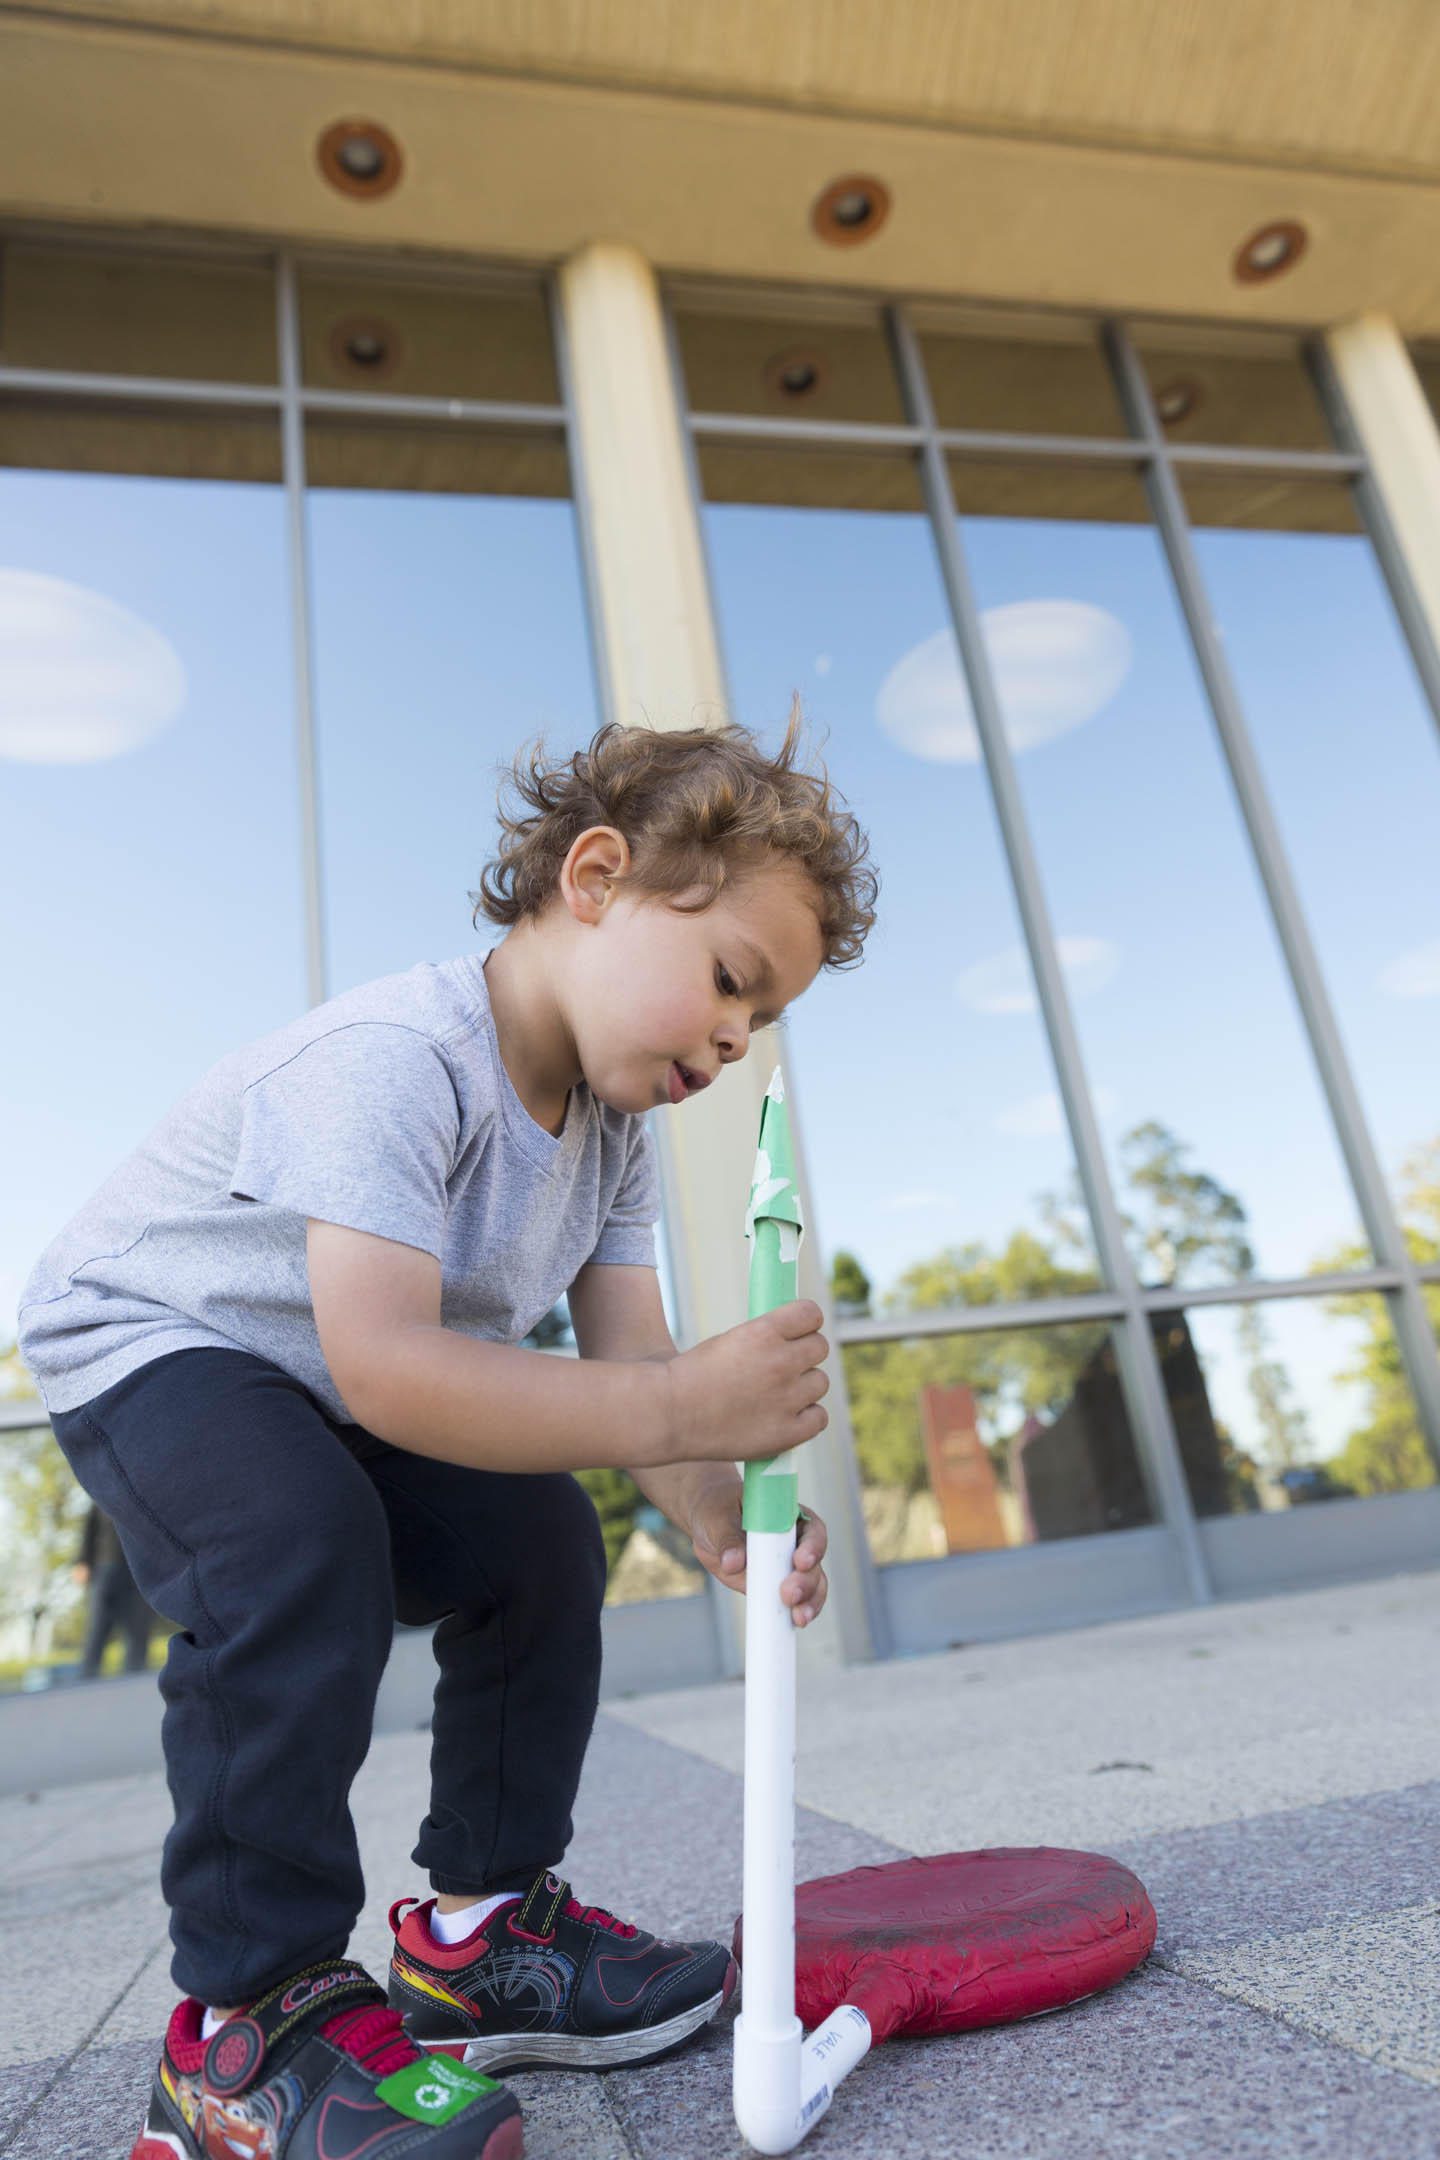 A child launching a handmade rocket during a science project